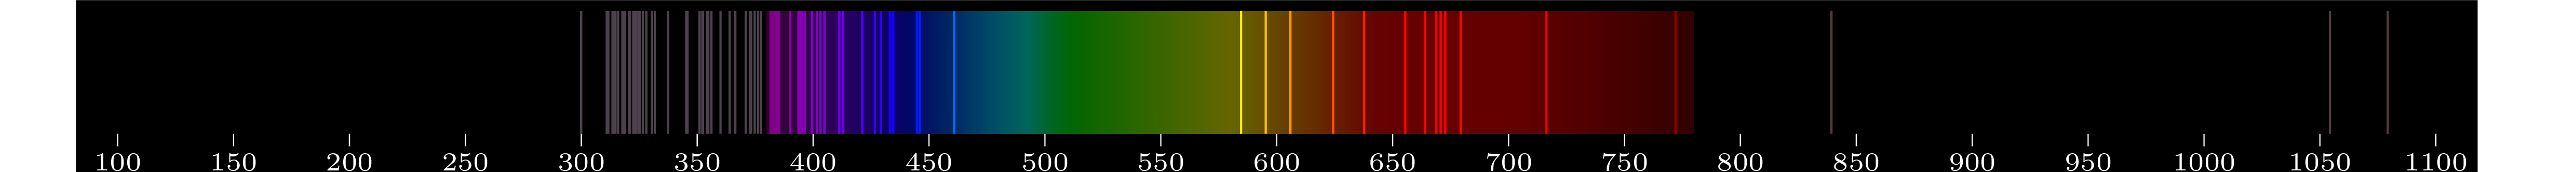 emmision spectra of element Cm